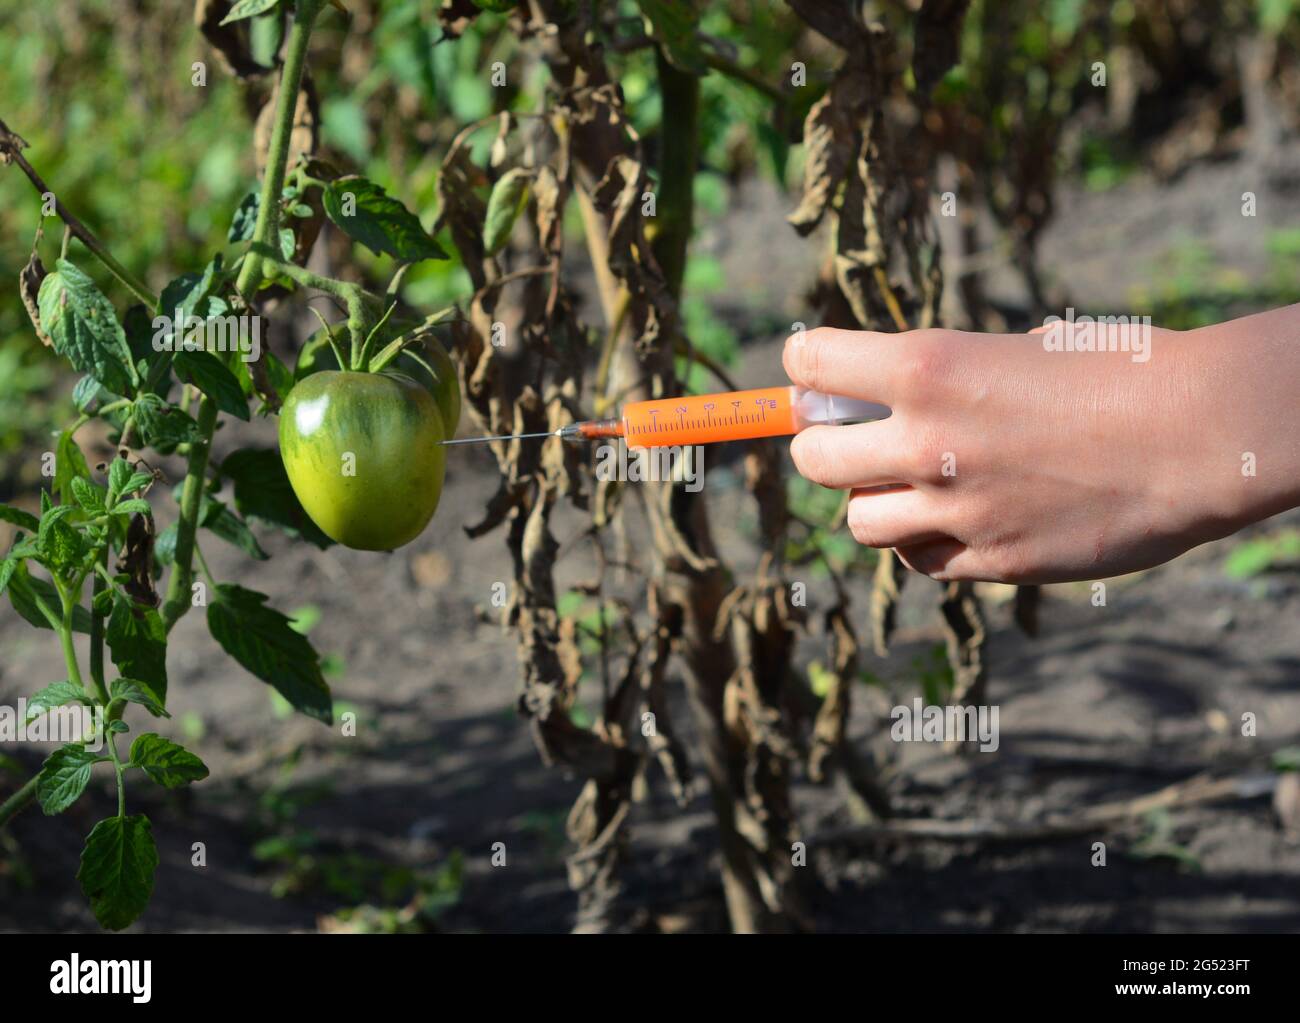 Tomato plant fungal disease treatment concept. Injecting chemicals into an infected tomato. GMO, transgenic tomato concept. Stock Photo